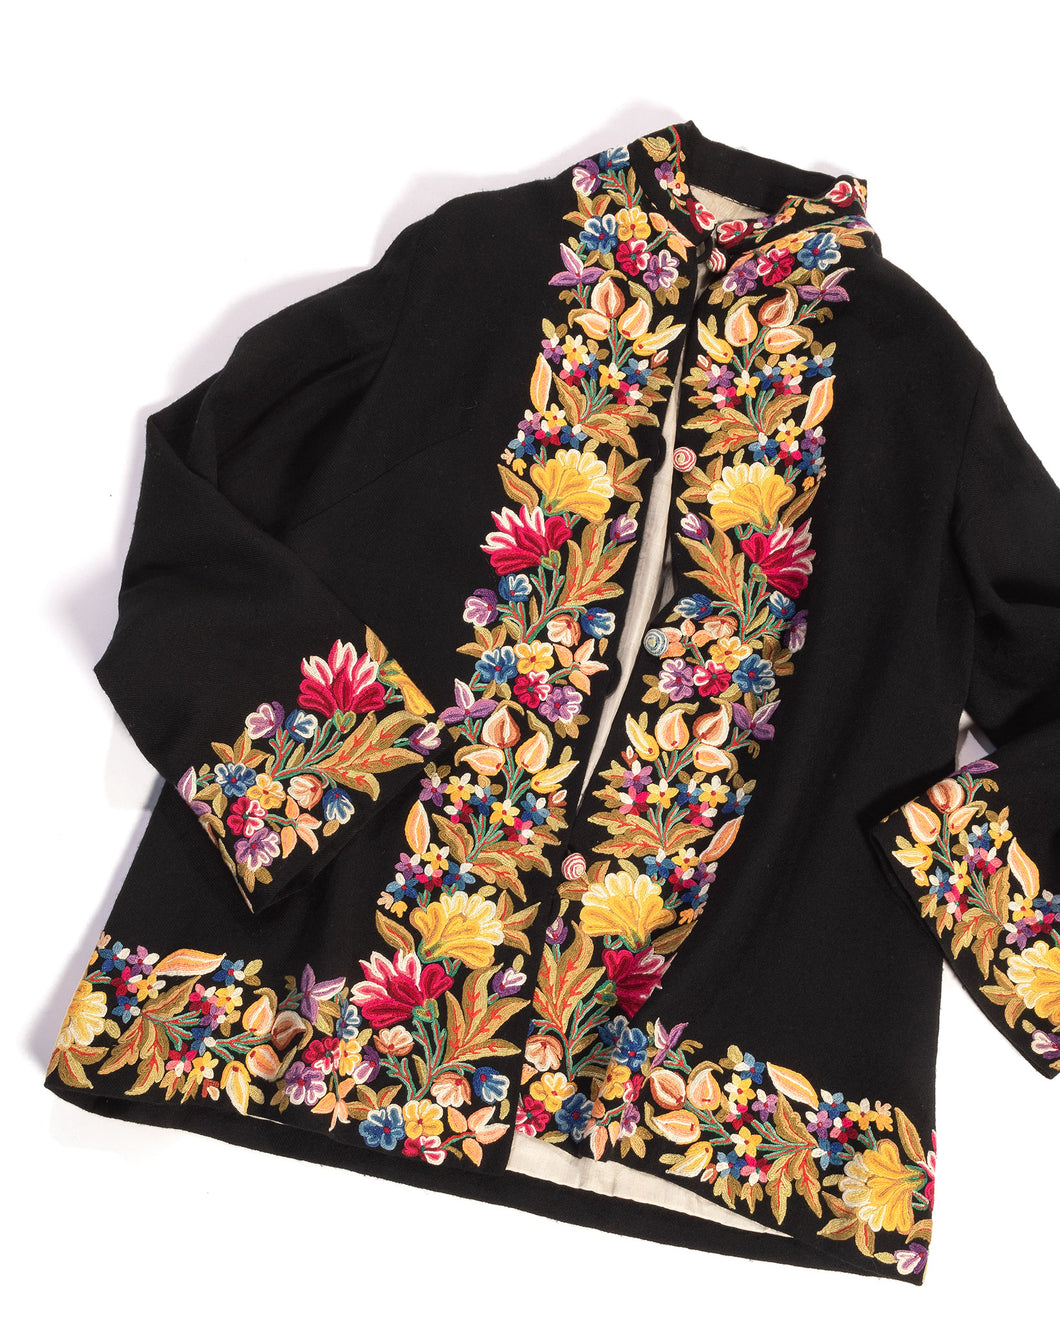 1930s Crewel Embroidery Wool Jacket with Silk Lining